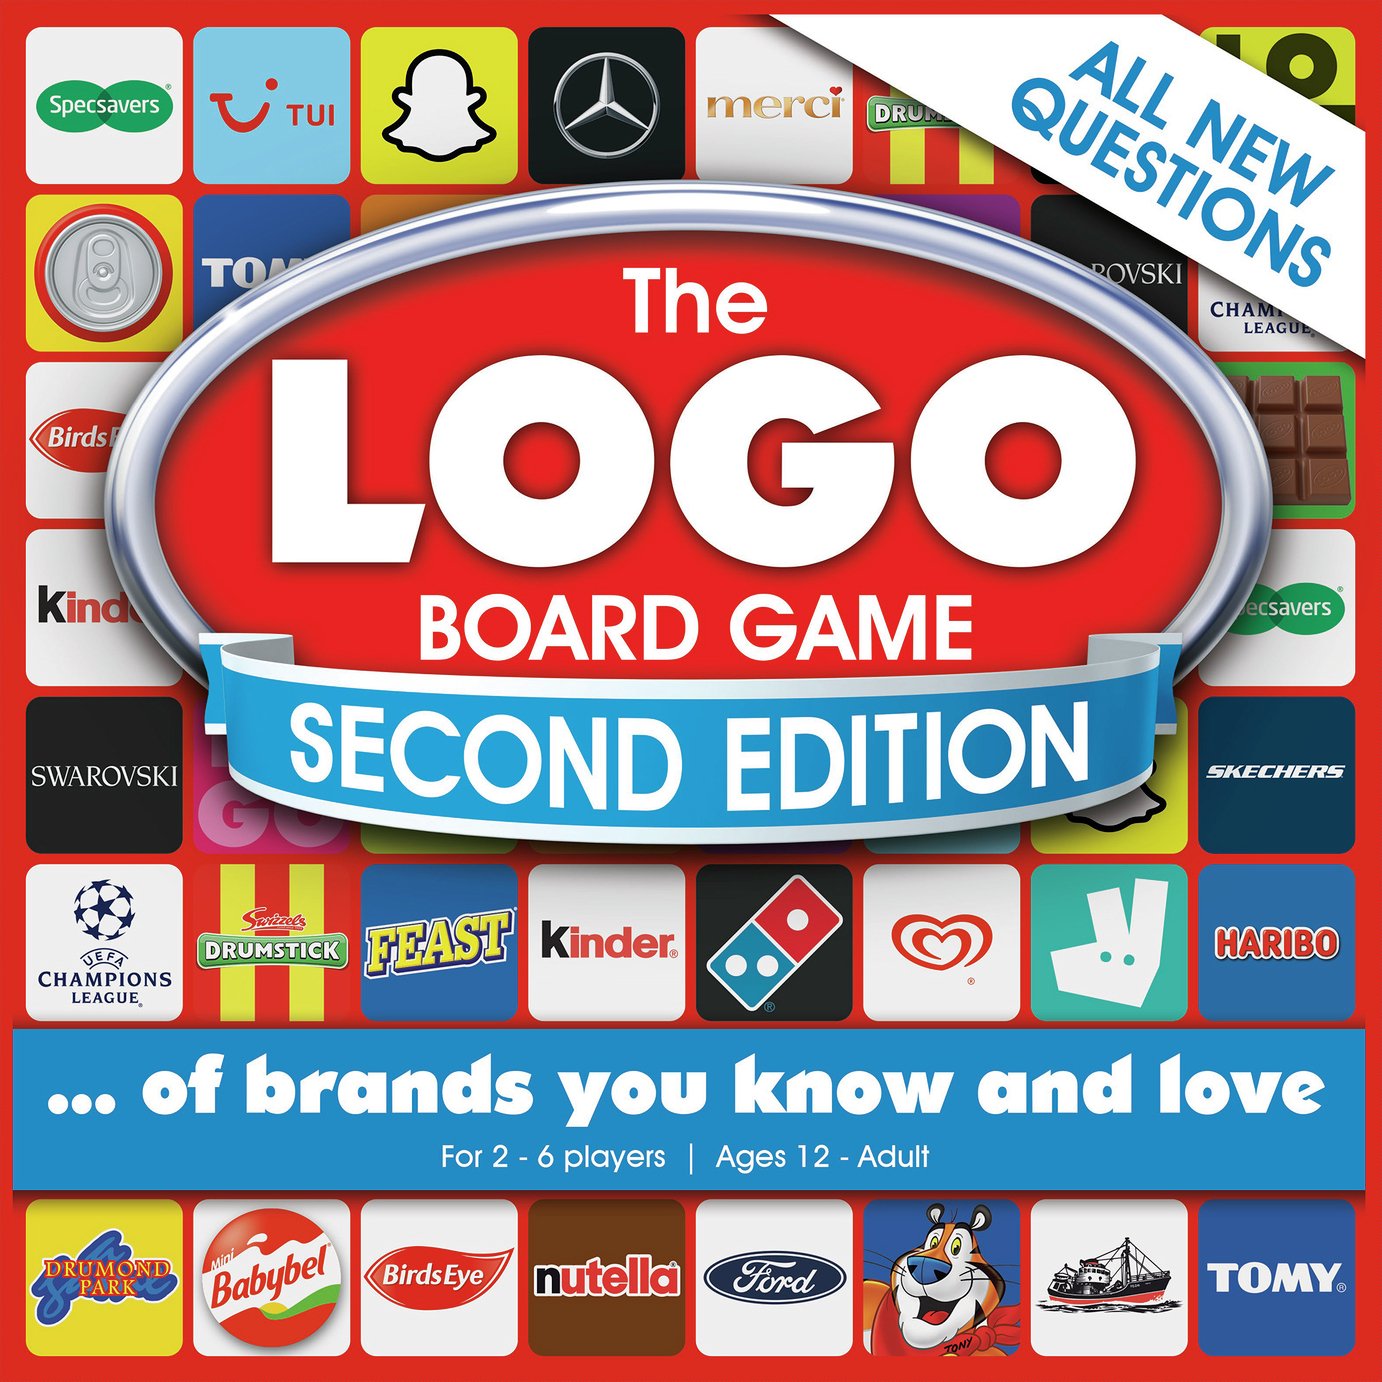 LOGO Board Game review